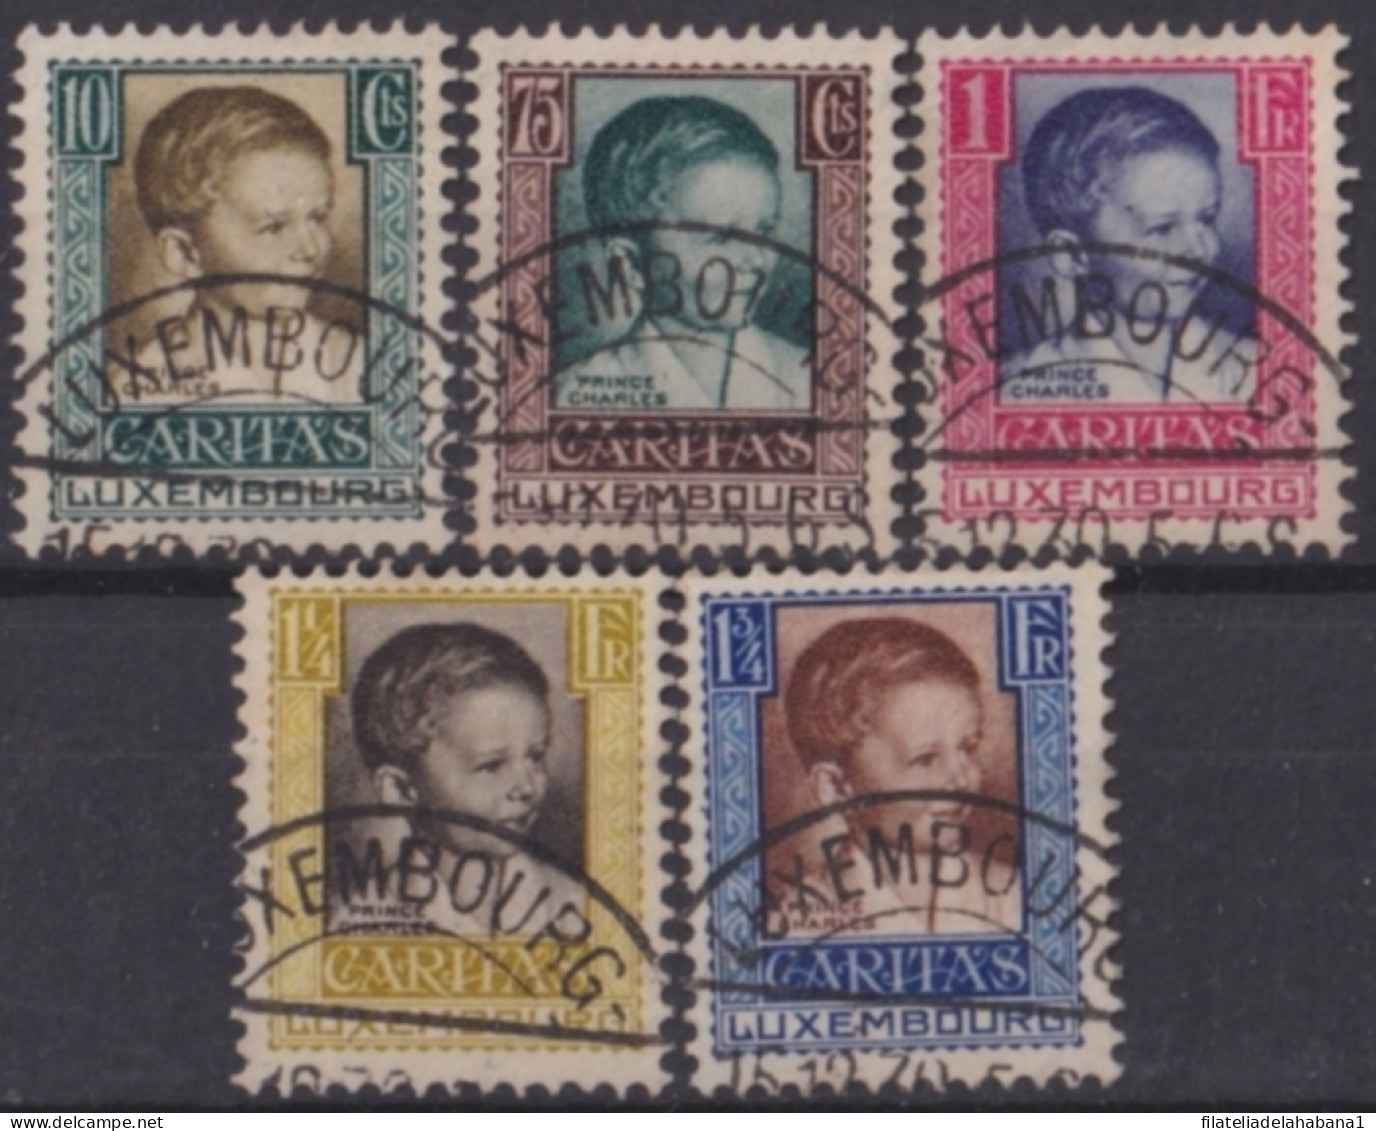 F-EX48514 LUXEMBOURG 1930 CHILD WELFARE CHILD SEMIPOSTAL USED + 50€.  - Oblitérés